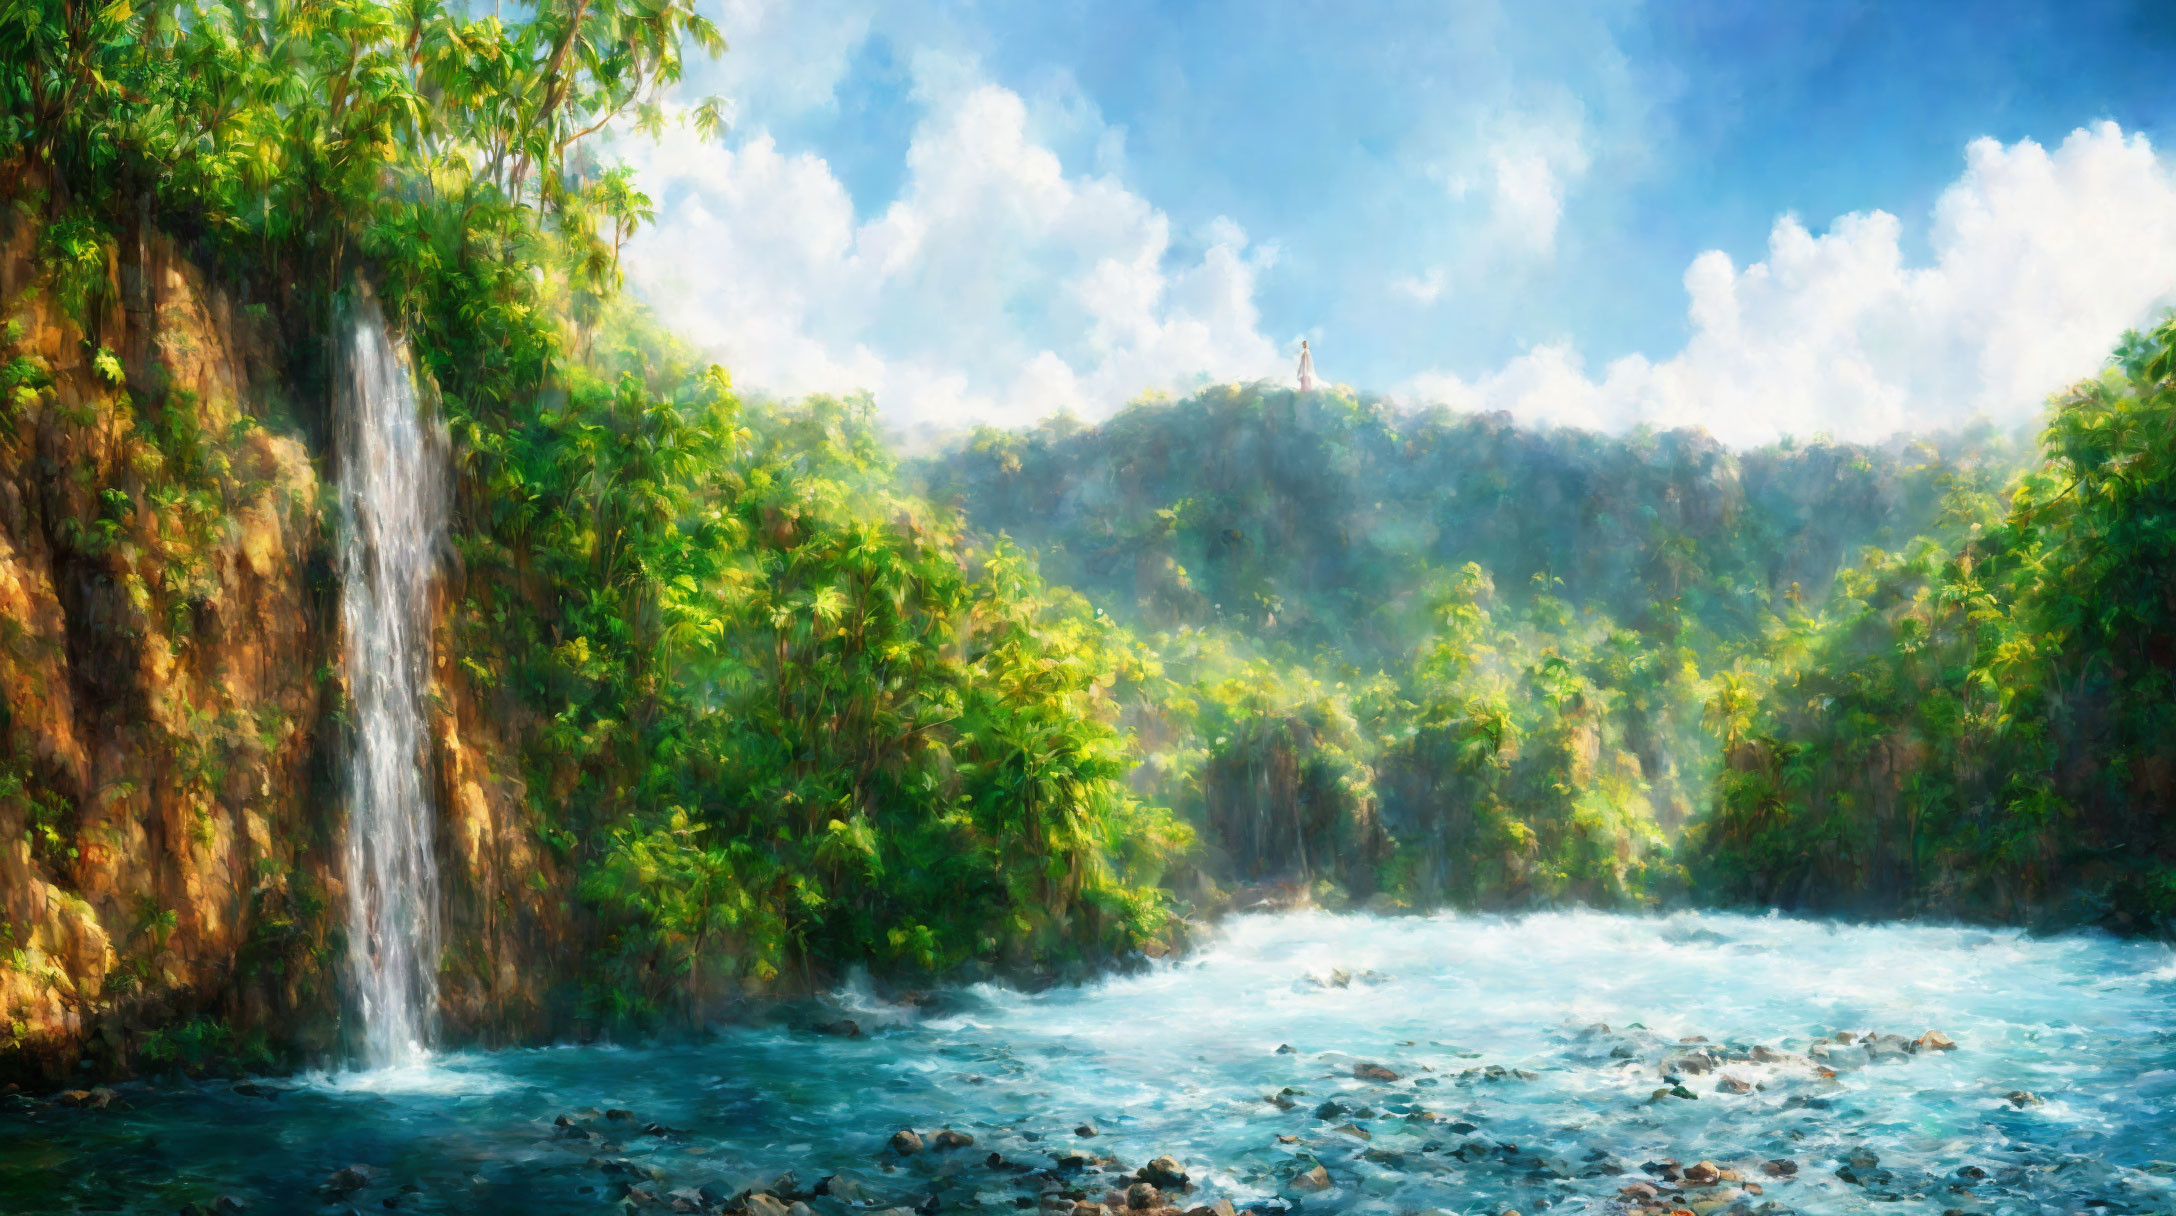 Tropical waterfall landscape with lush green foliage